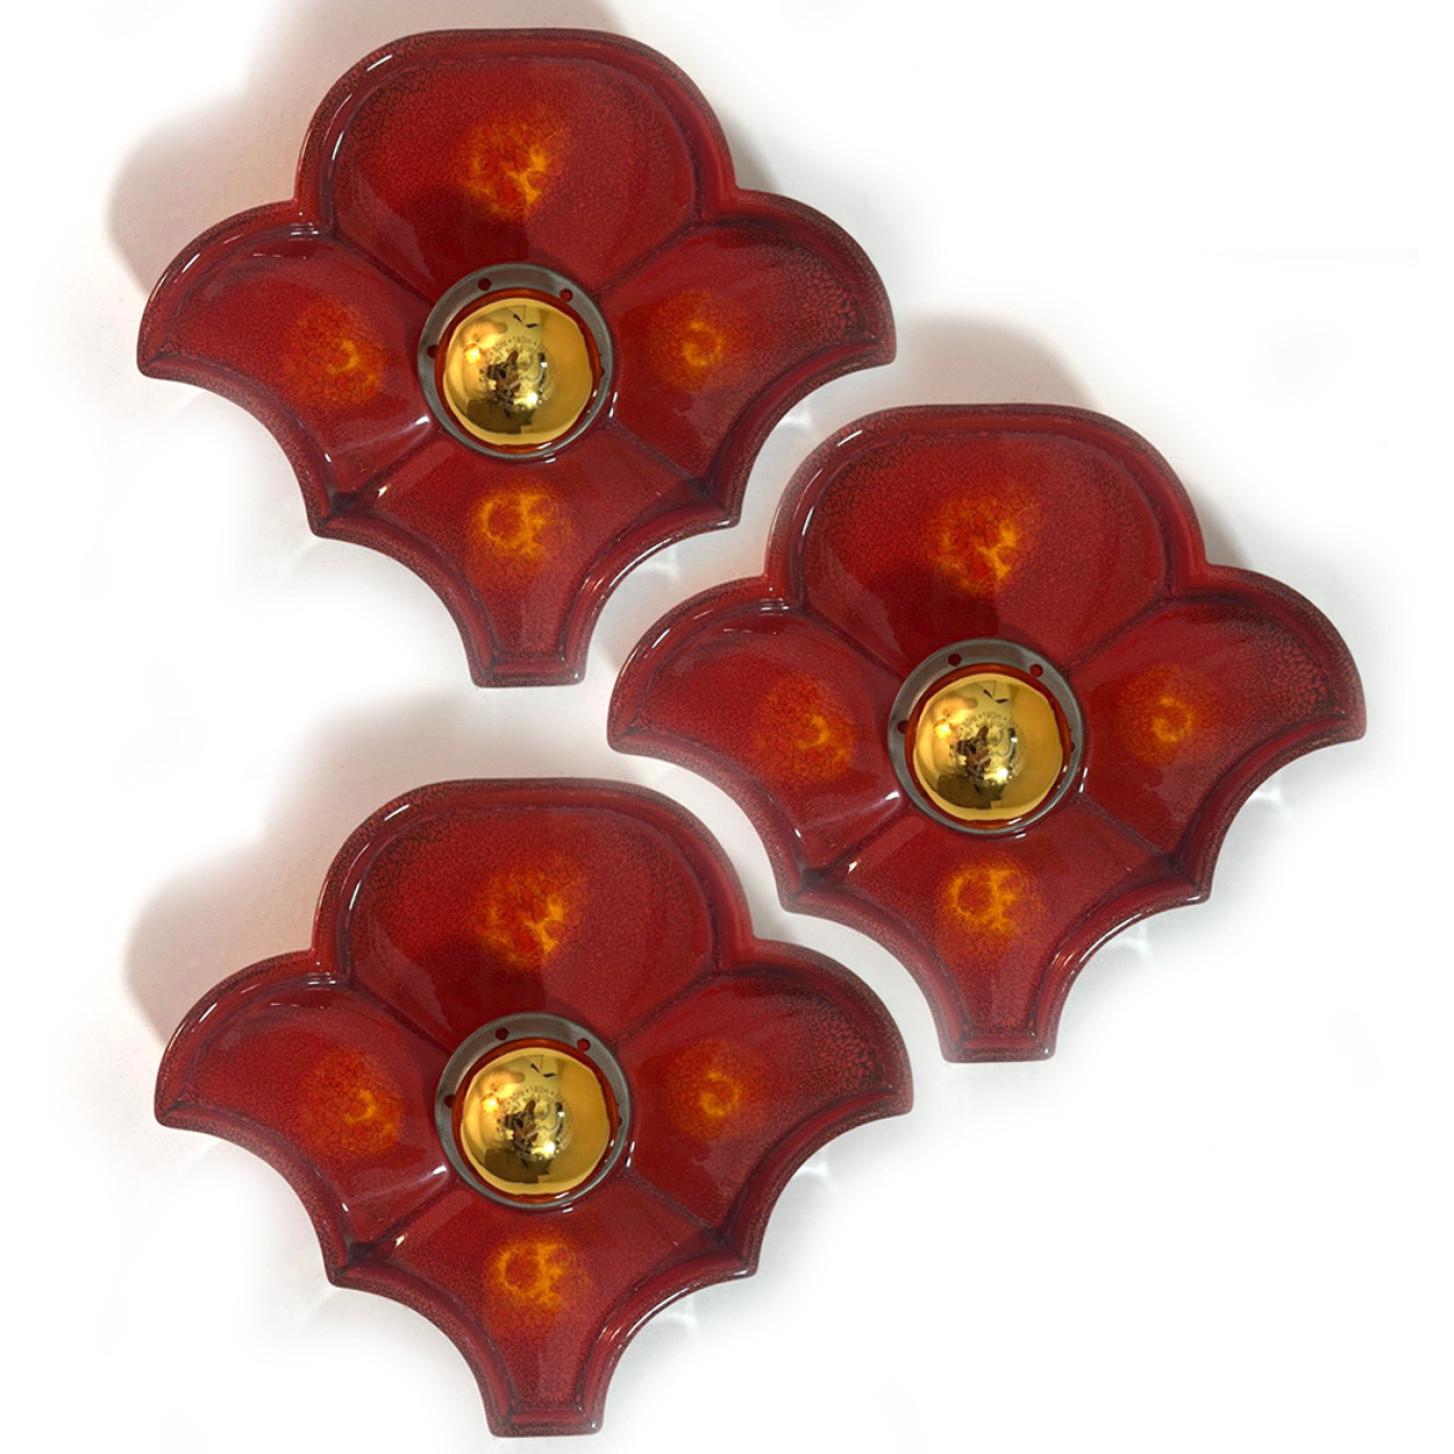 Several Flower Red Ceramic Wall Lights by Hustadt Keramik, Germany, 1970 For Sale 7